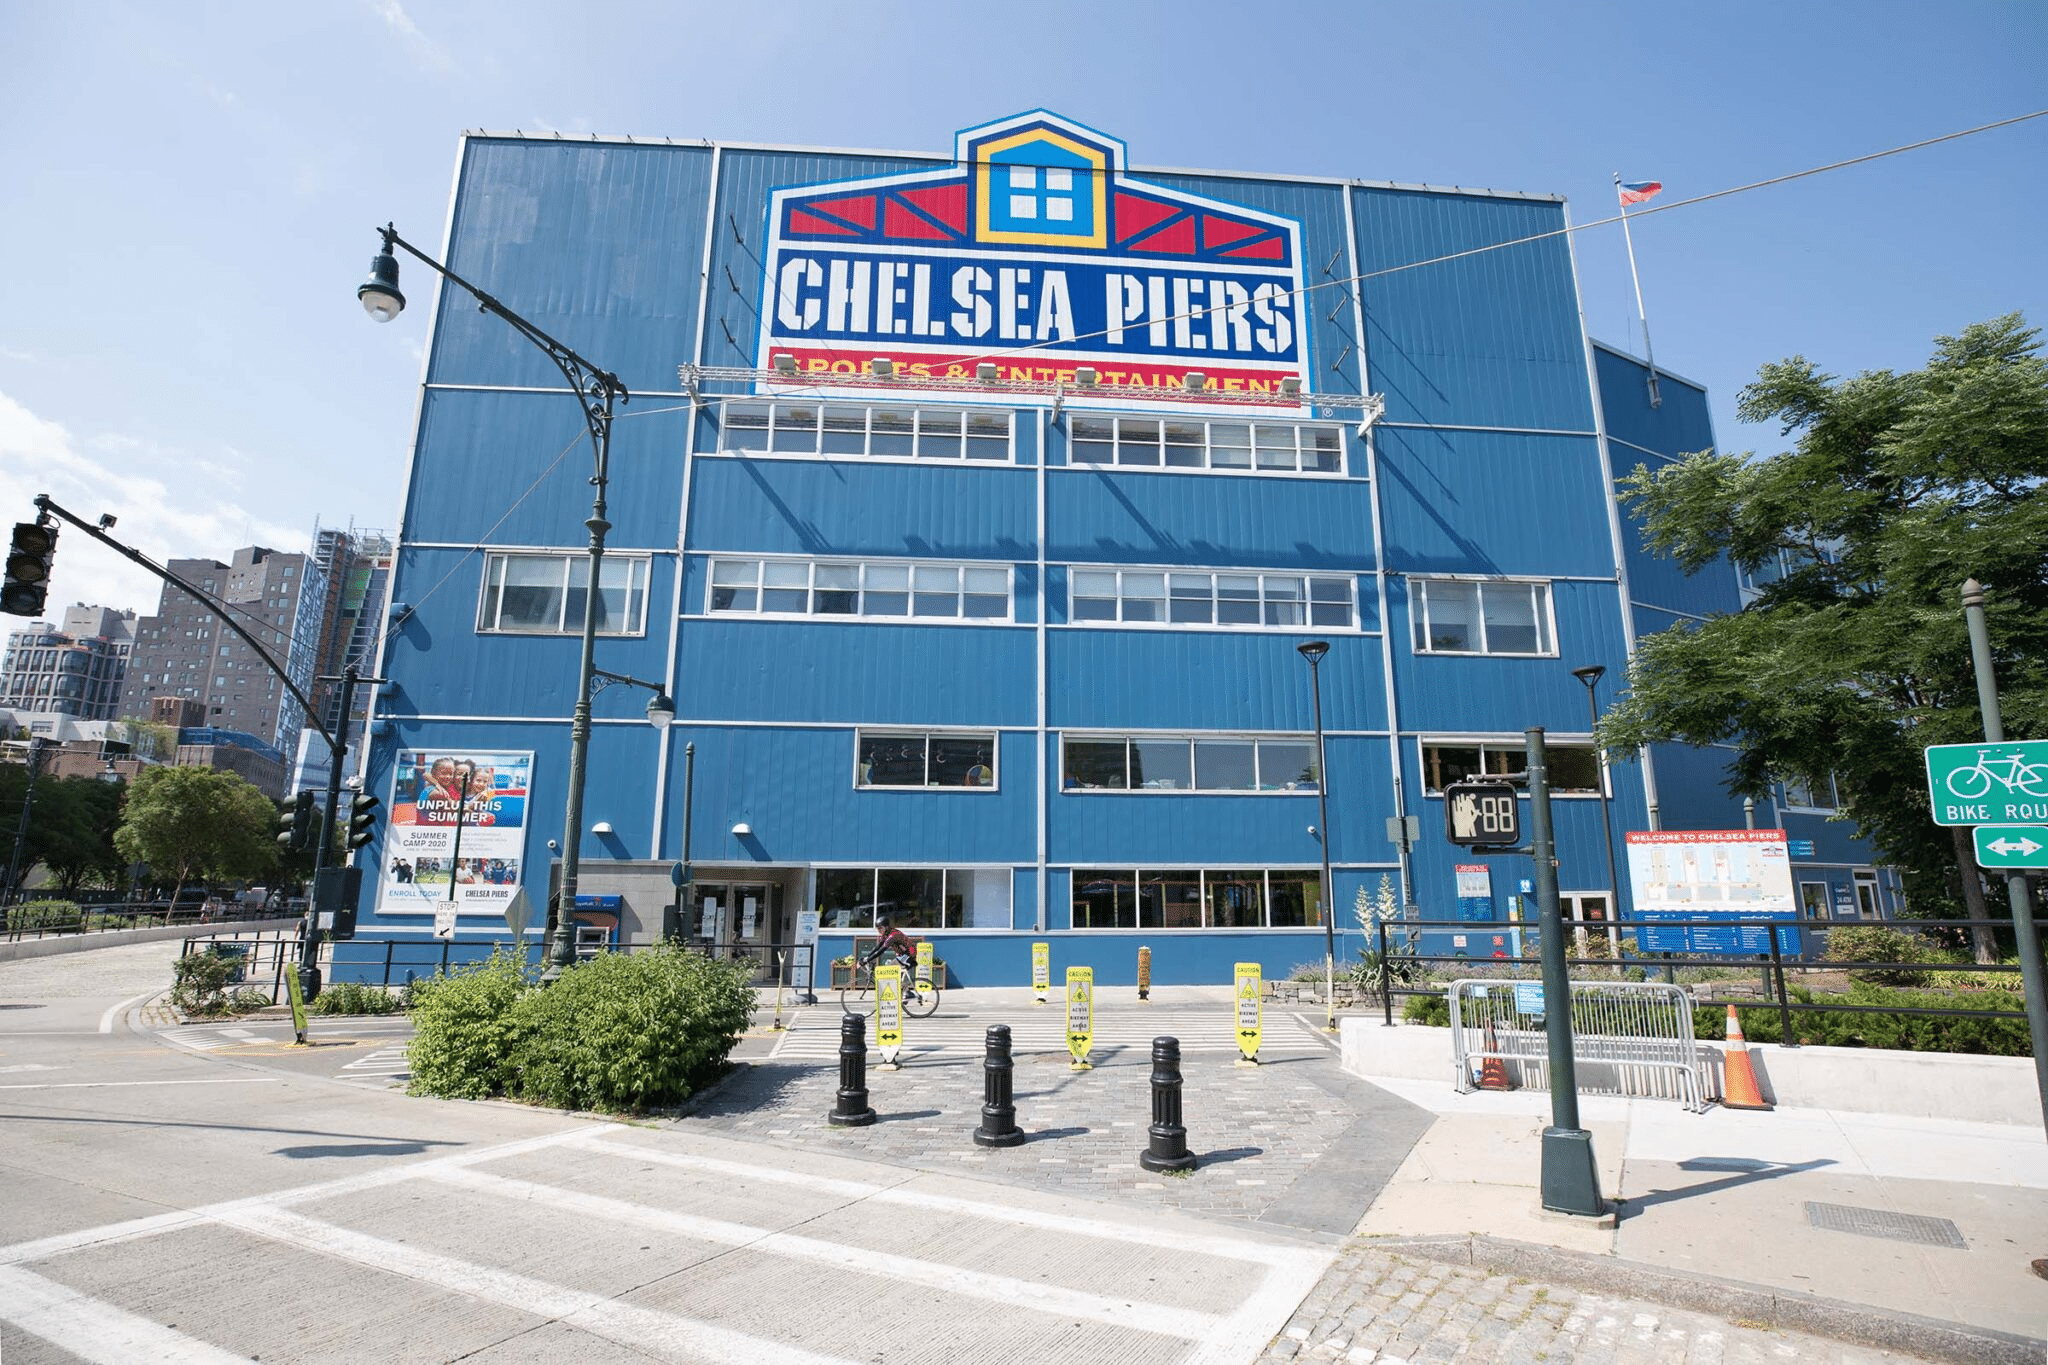 Chelsea Piers Overview